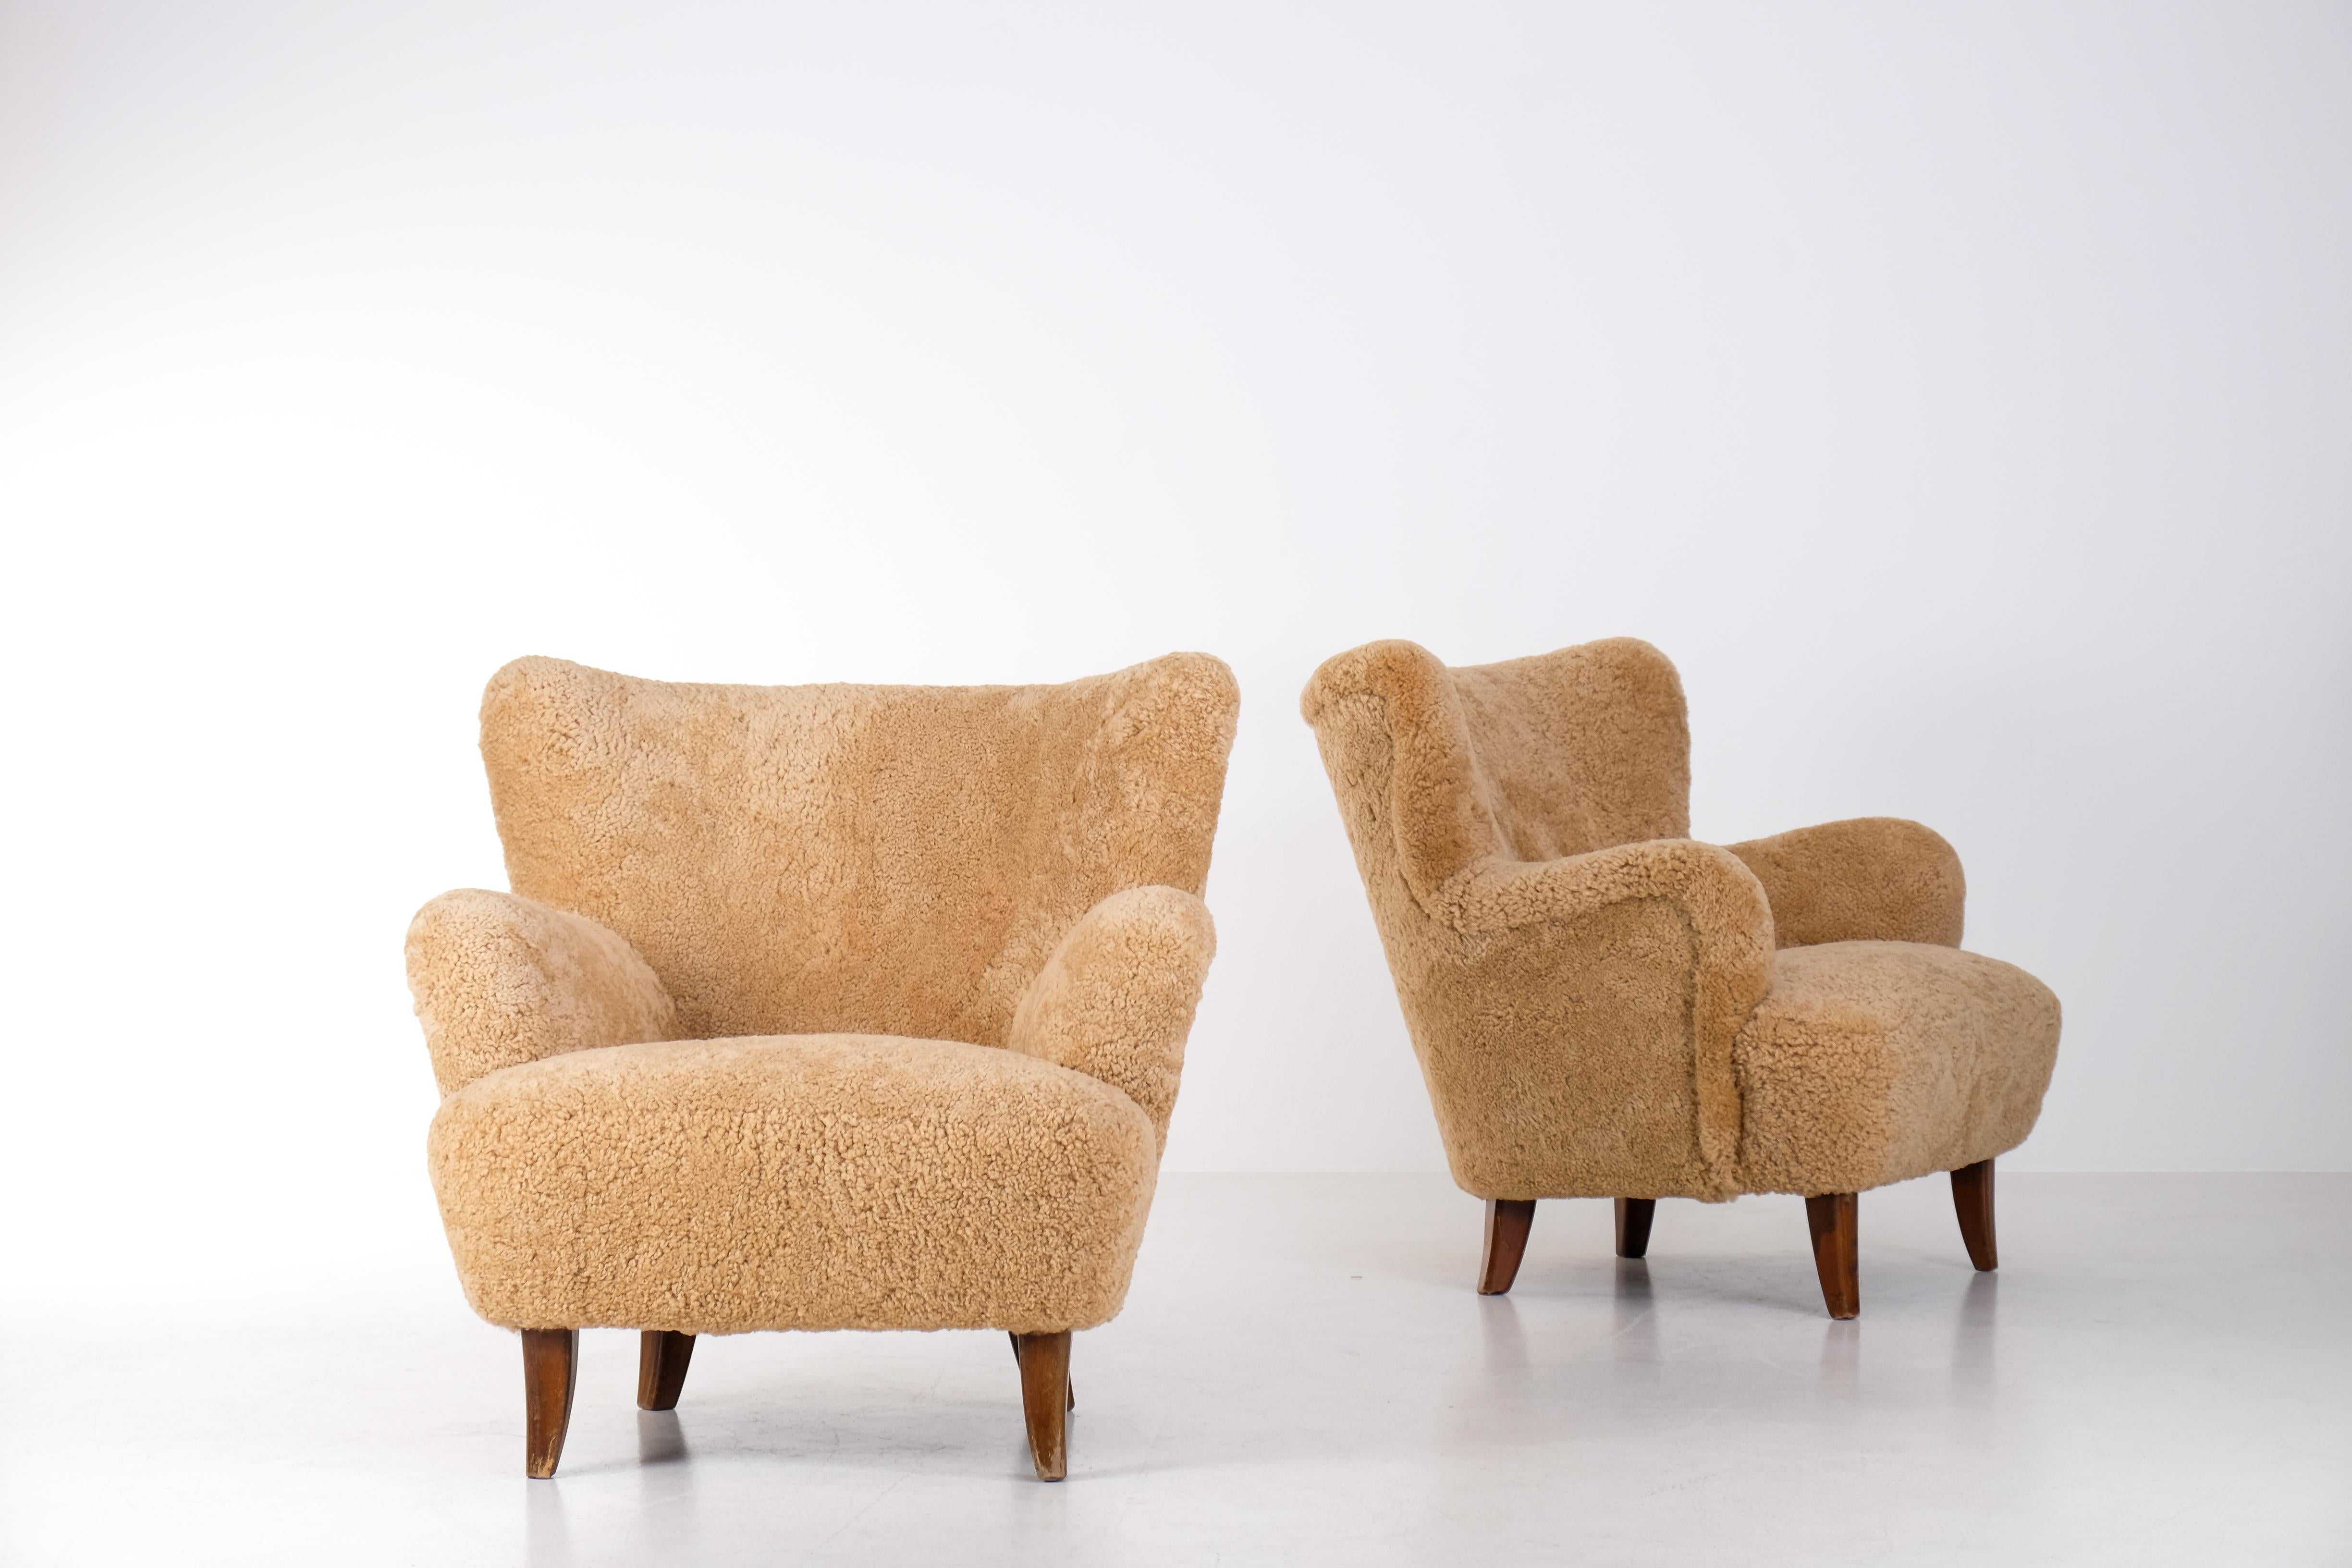 Mid-20th Century Pair of 'Laila' Armchair in sheepskin by Ilmari Lappalainen, Finland, 1950s For Sale